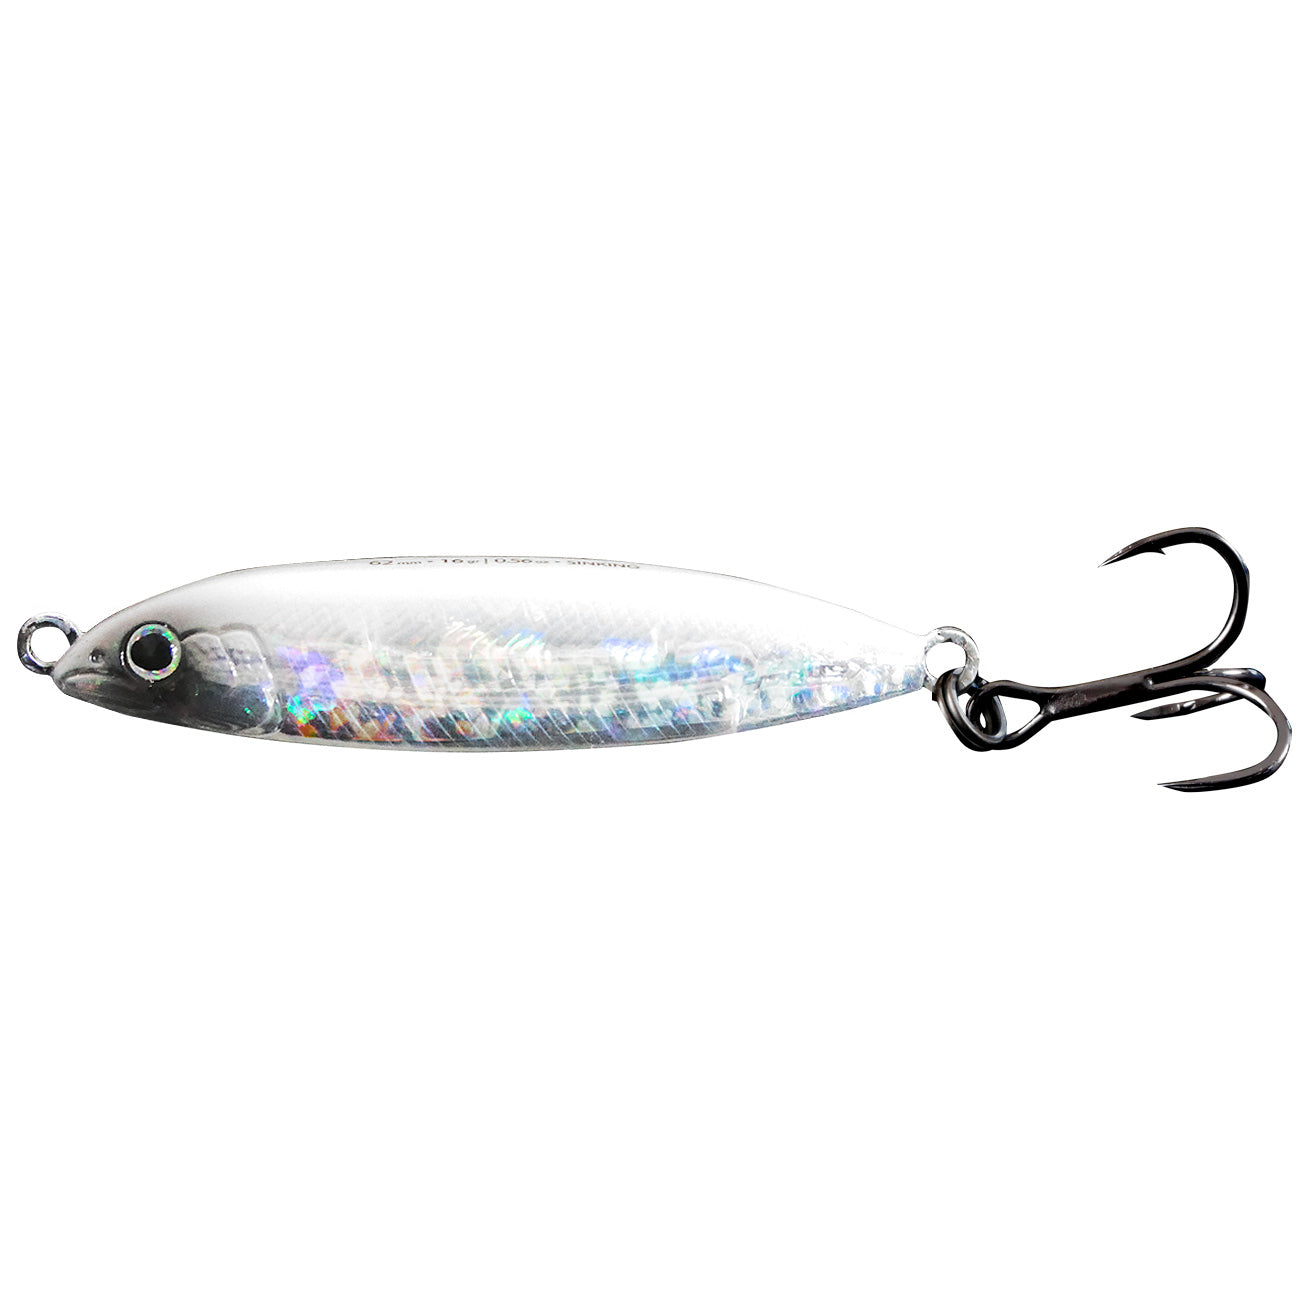 Fishus Lures Lurenzo Wobly Fishing Lure 62mm 16 gr